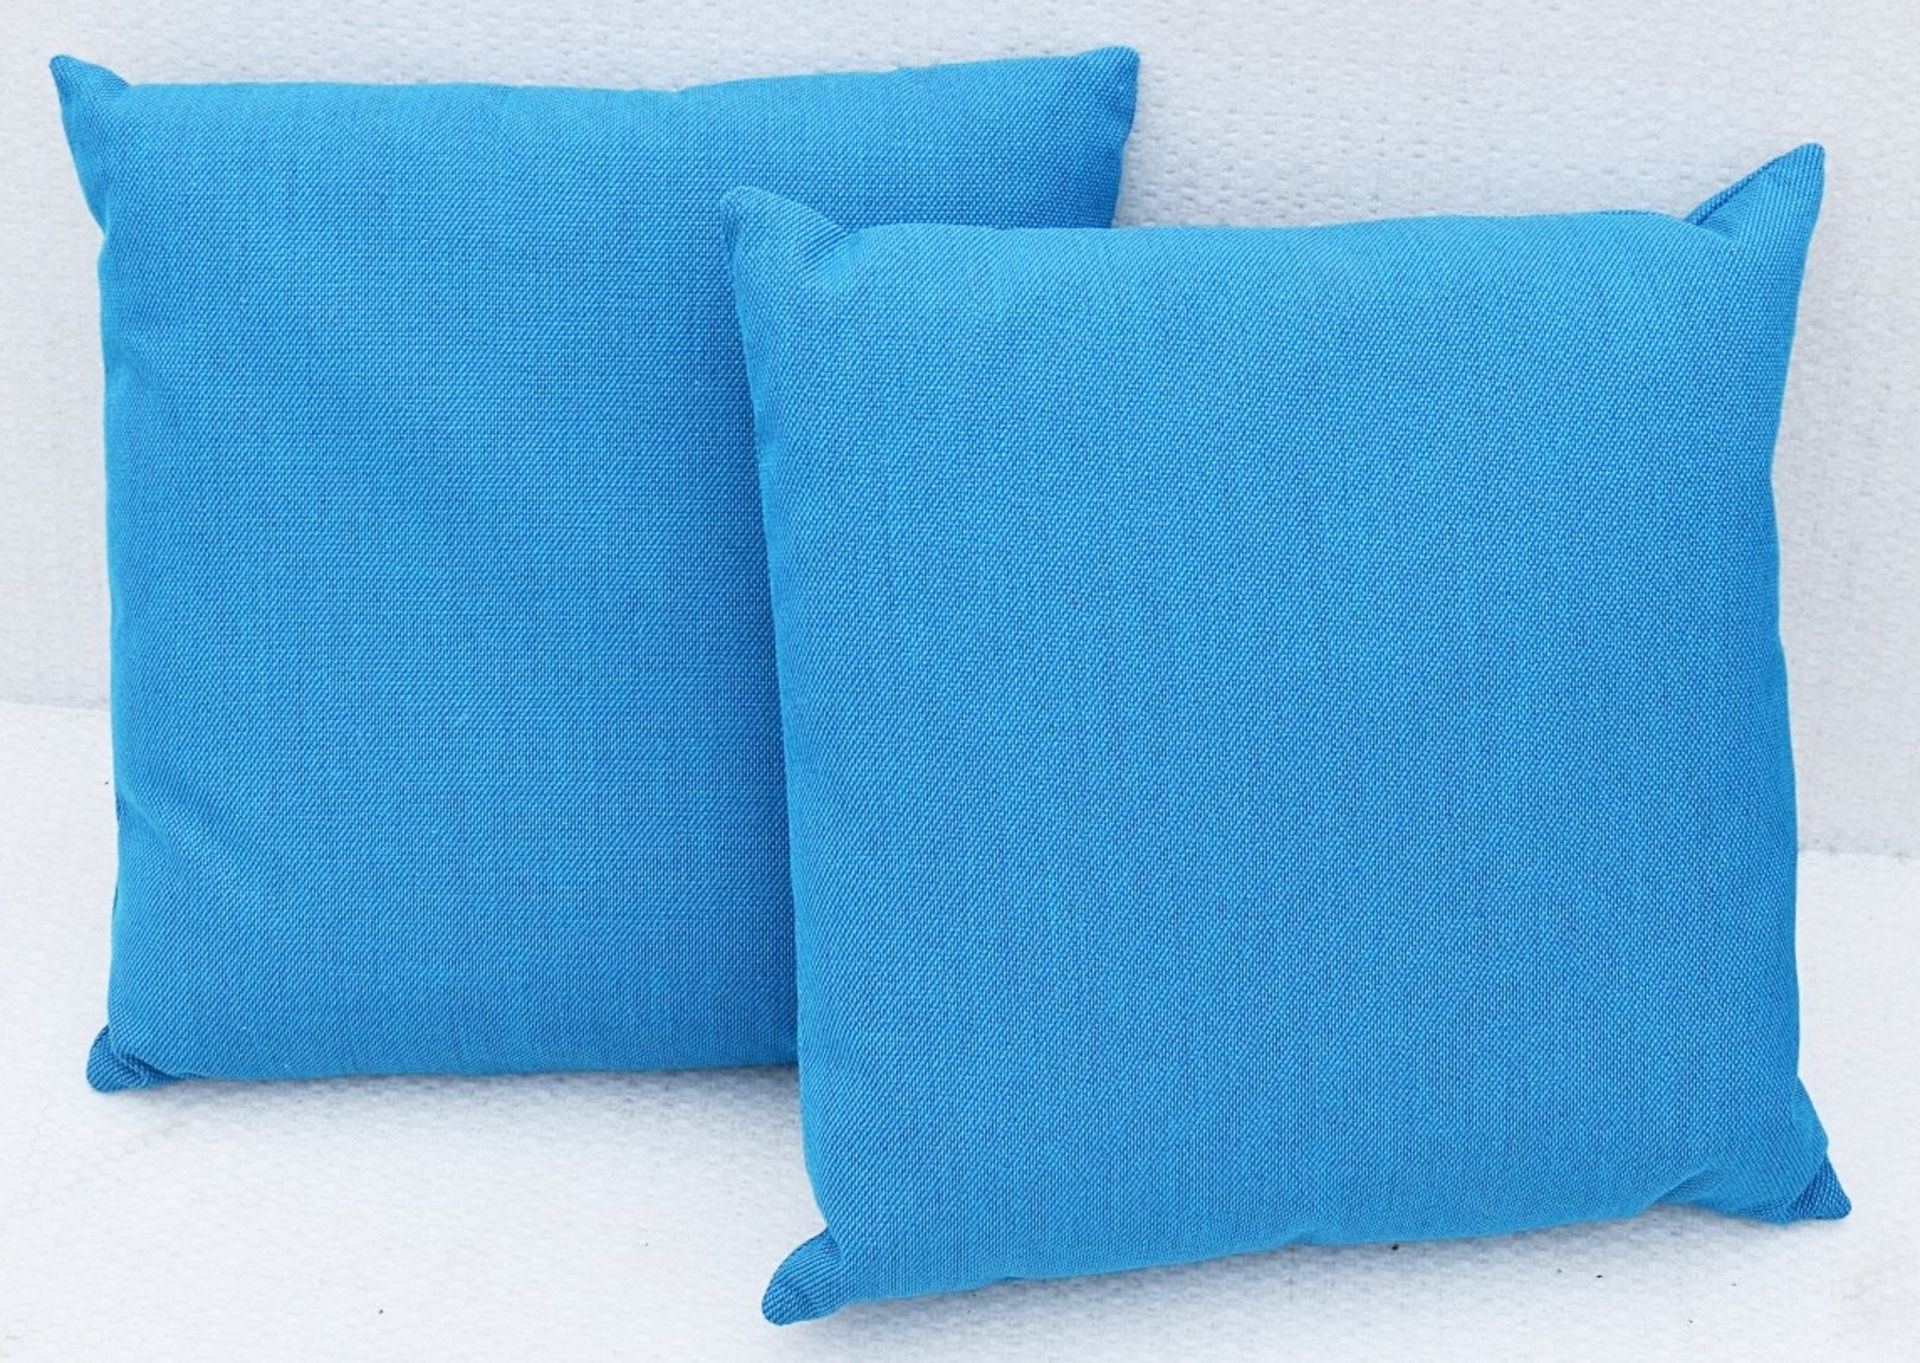 Pair of POLTRONA FRAU Large Luxury Square Cushions Upholstered in a Rich Blue Premium Fabric - Image 2 of 7